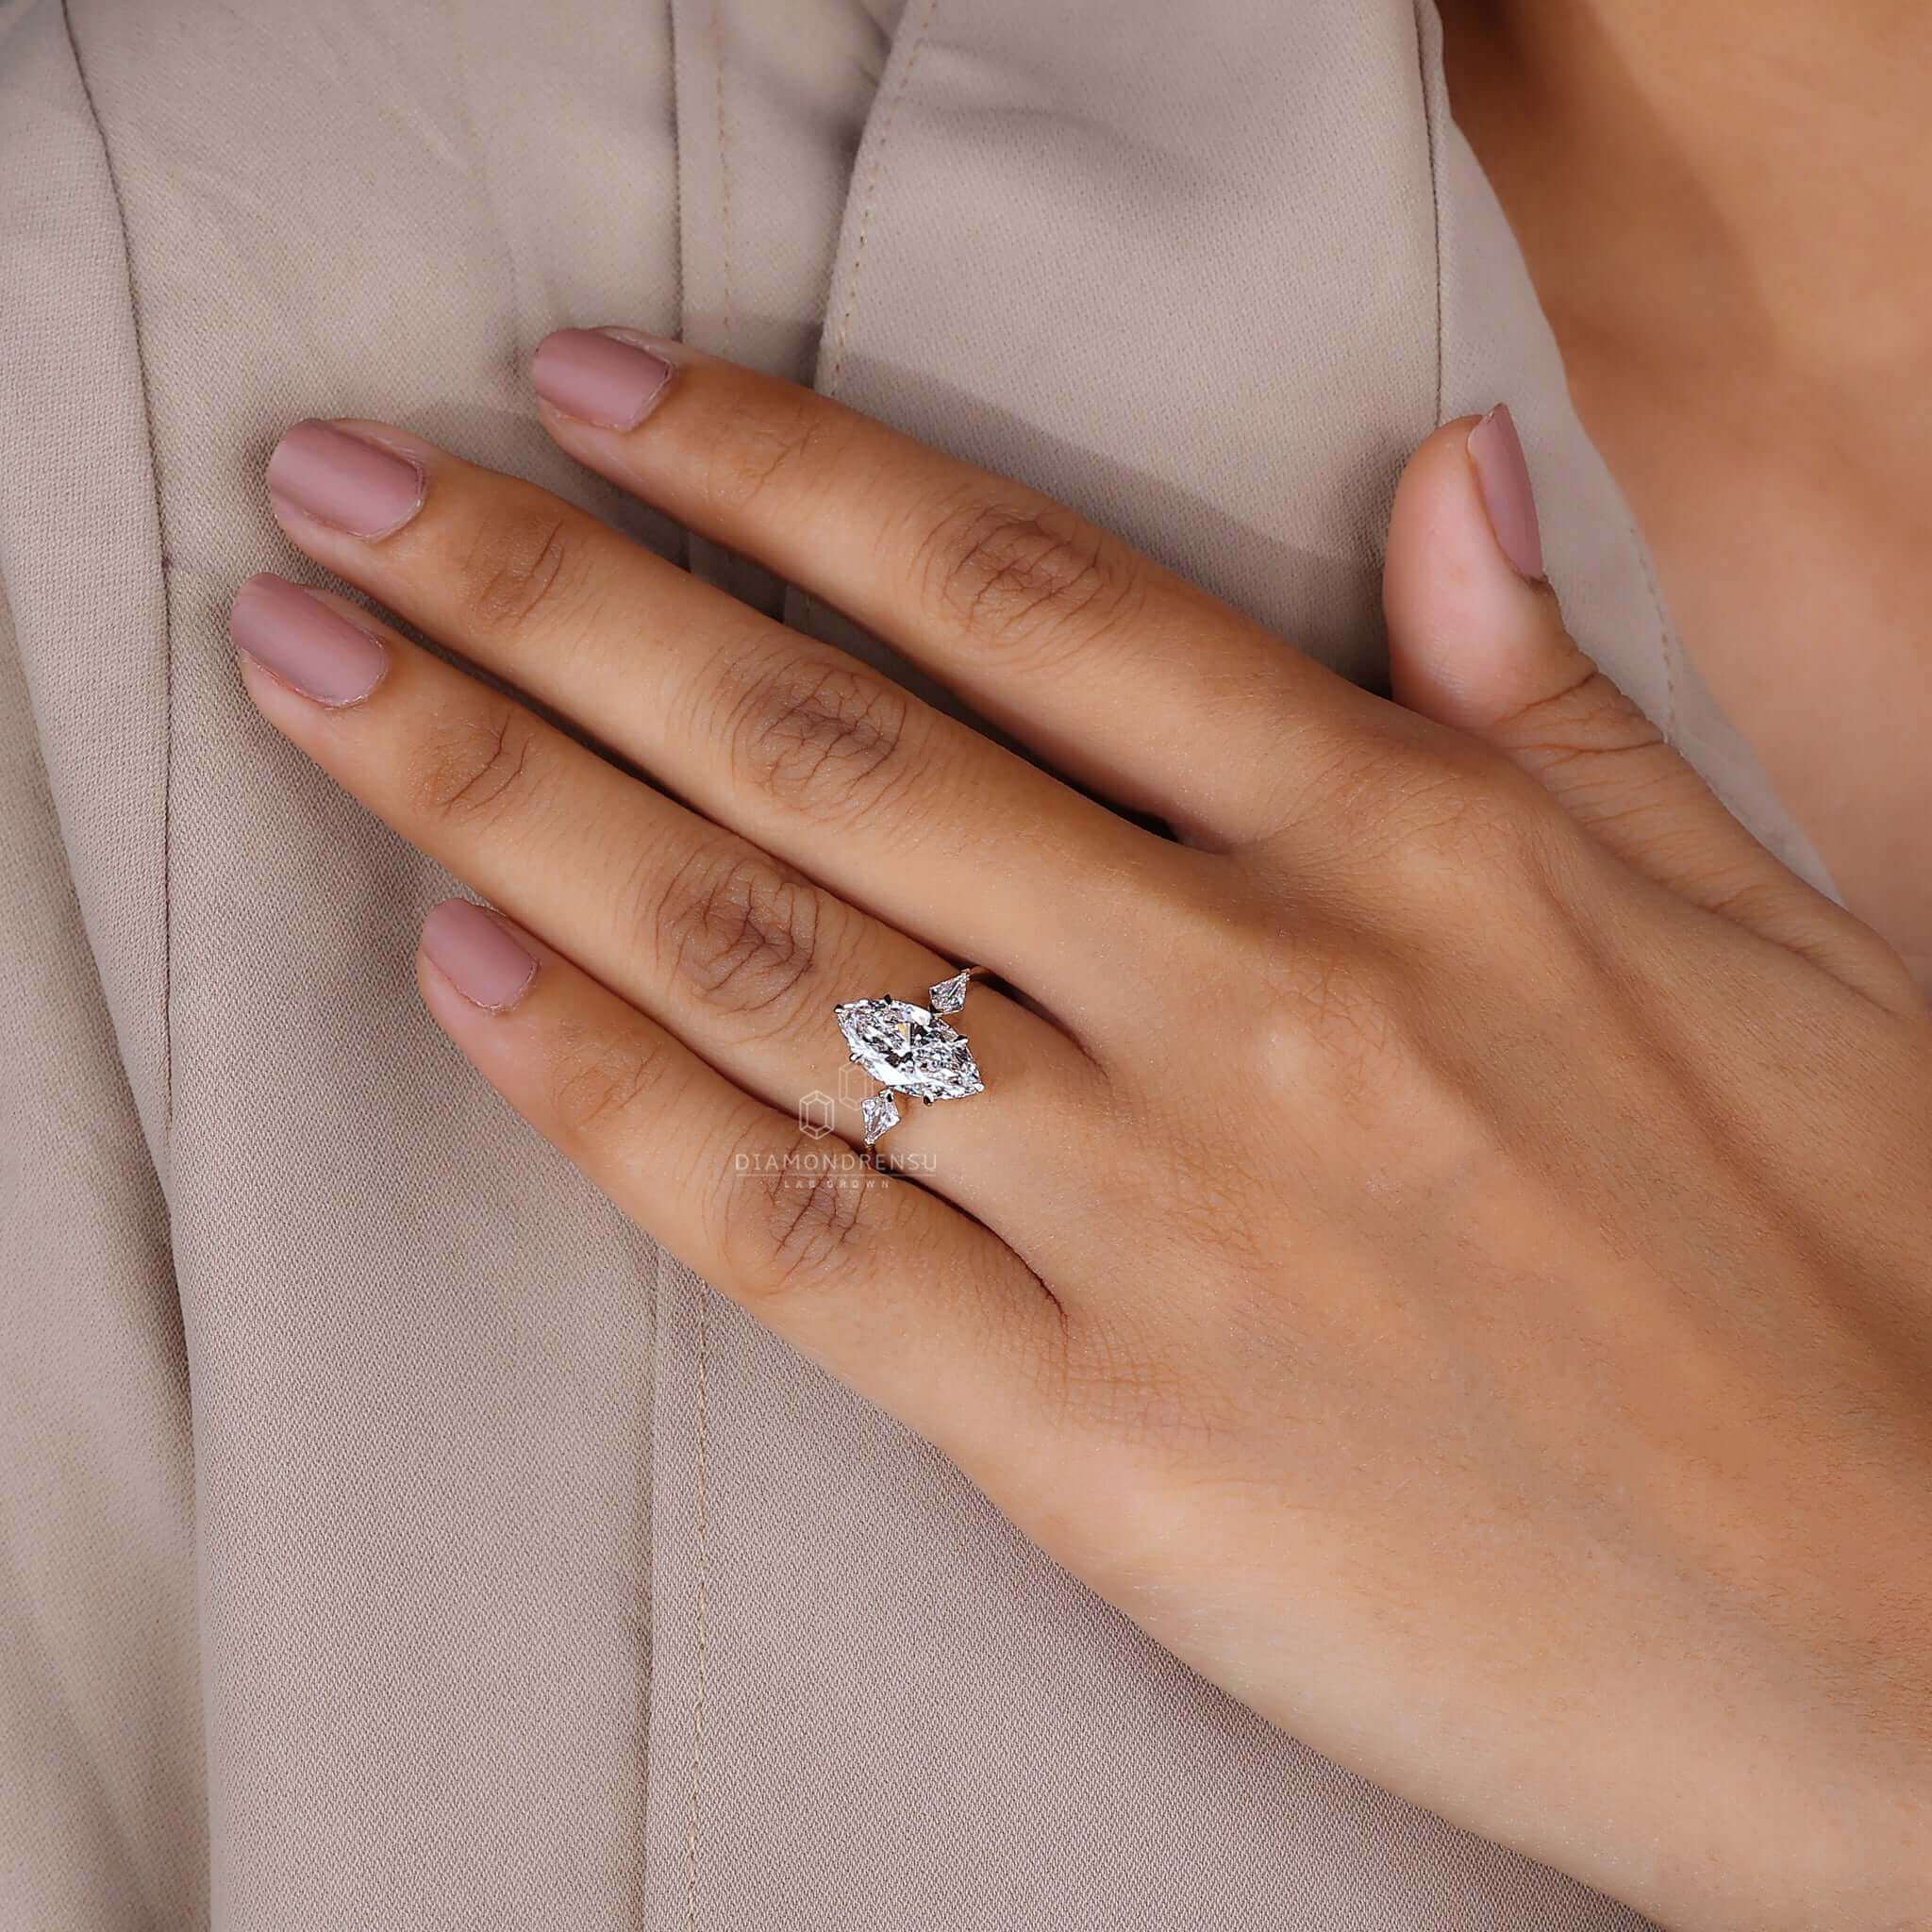 A hand displaying an anniversary gift of a beautiful diamond engagement ring.